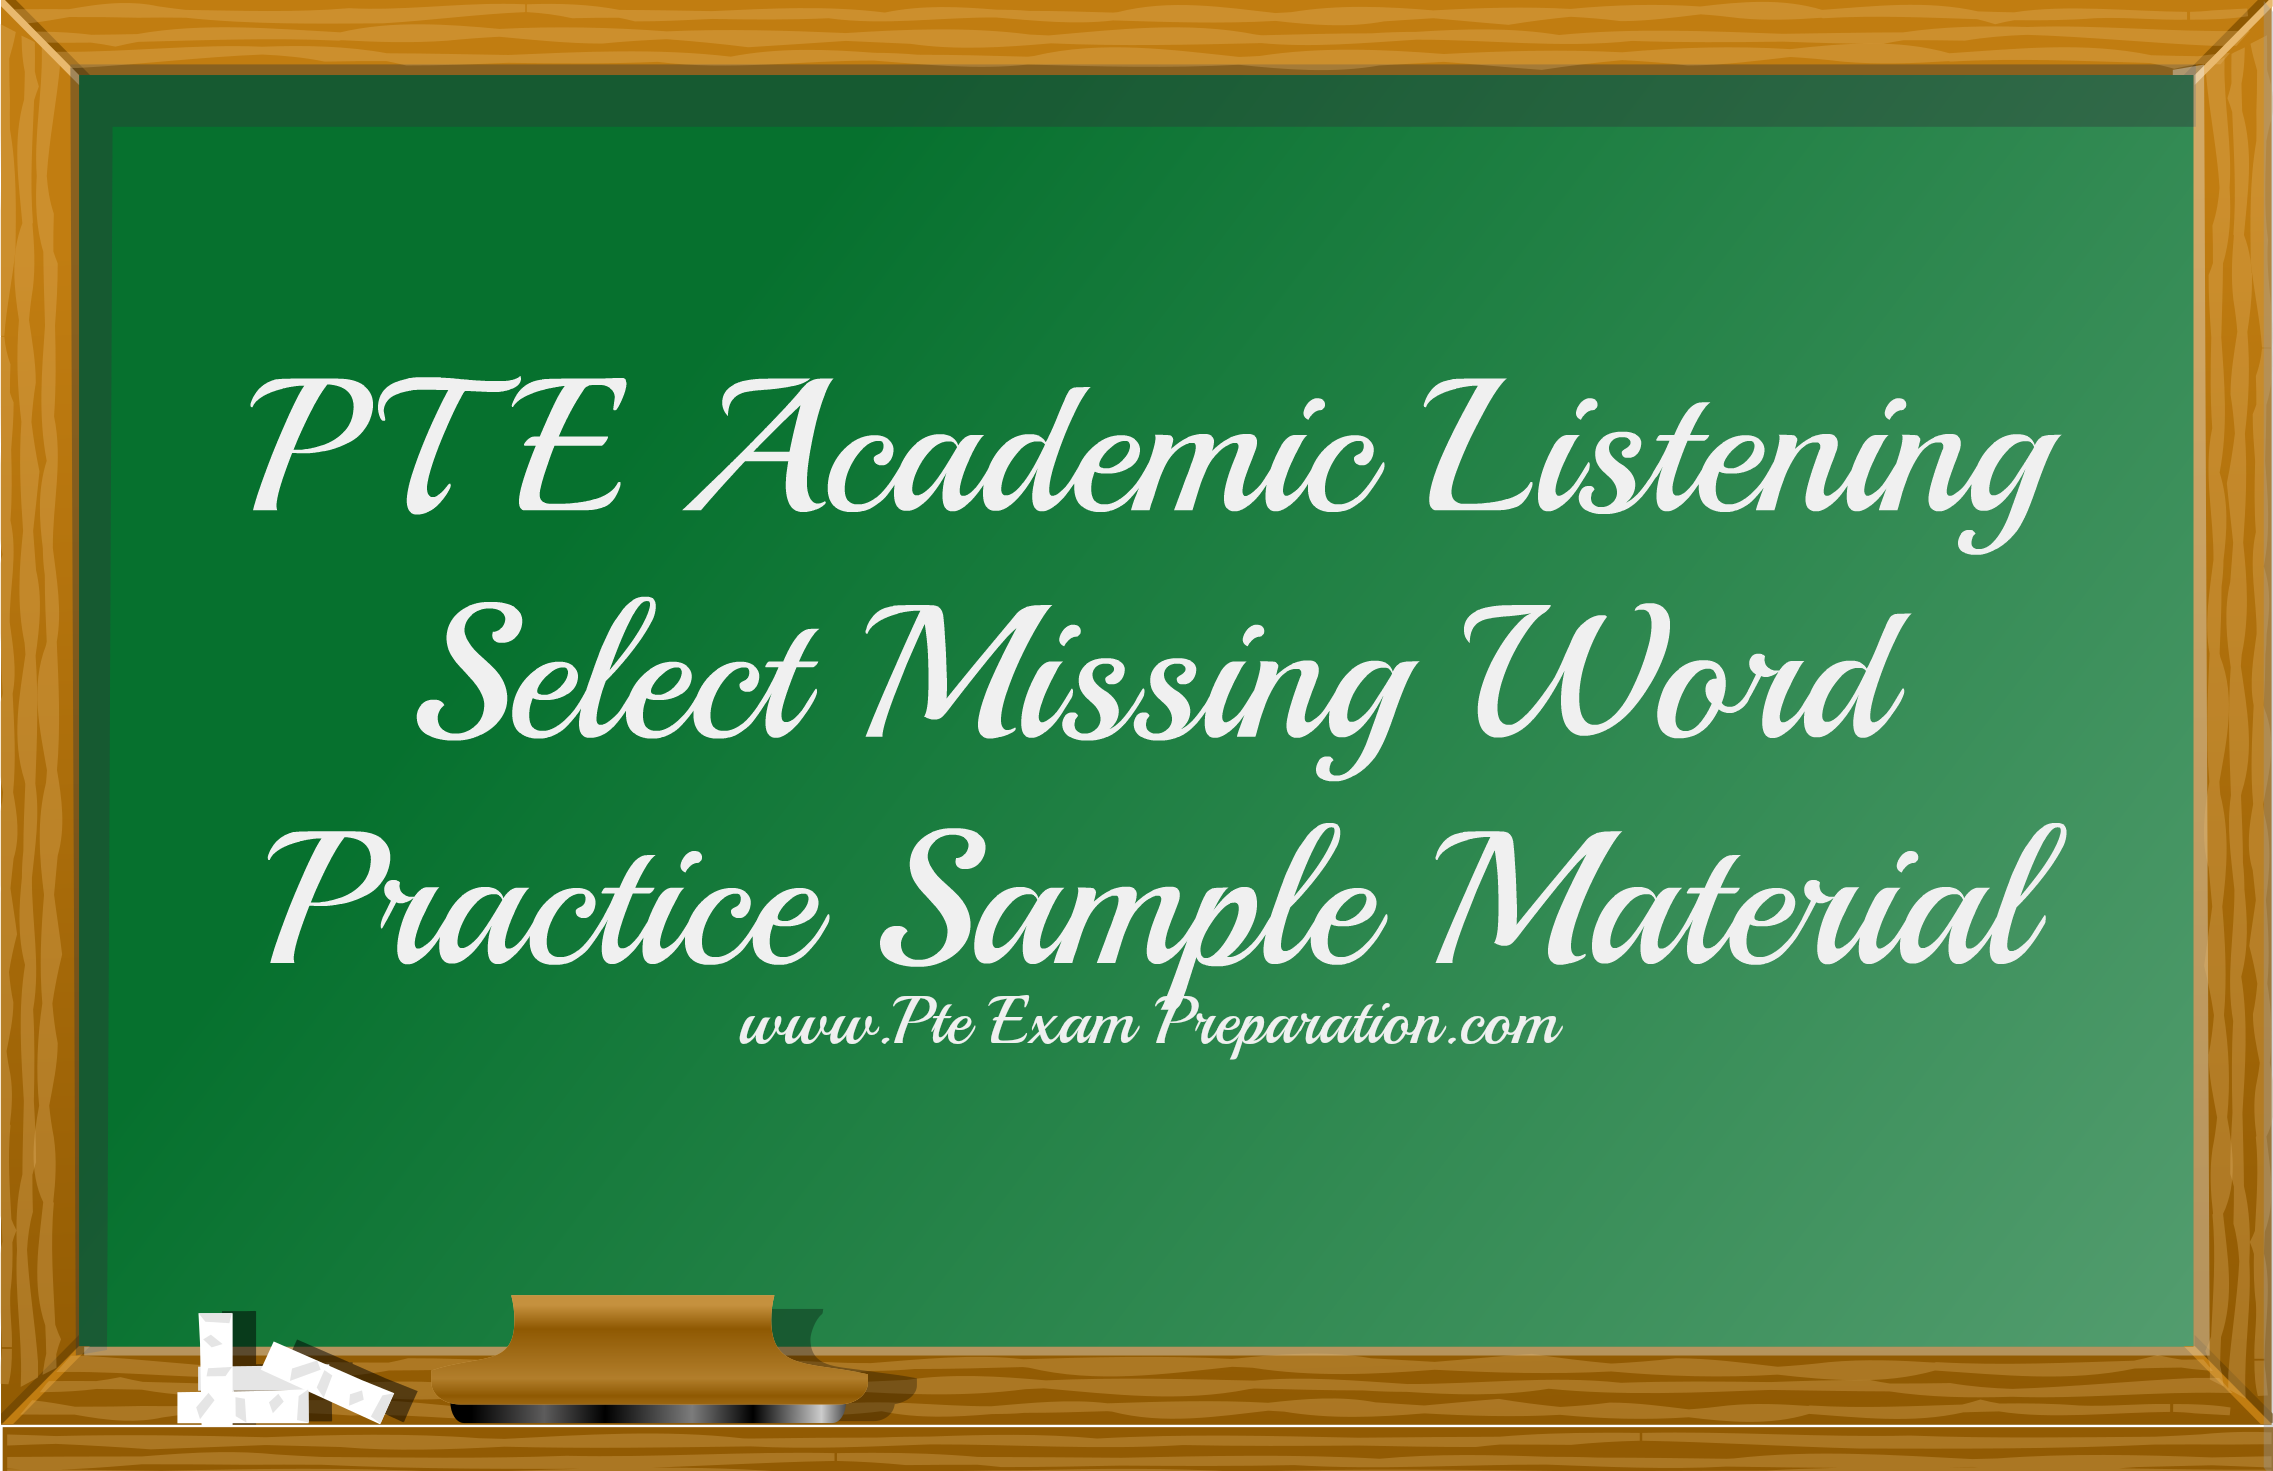 PTE Academic Listening: Select Missing Word Practice Sample Material